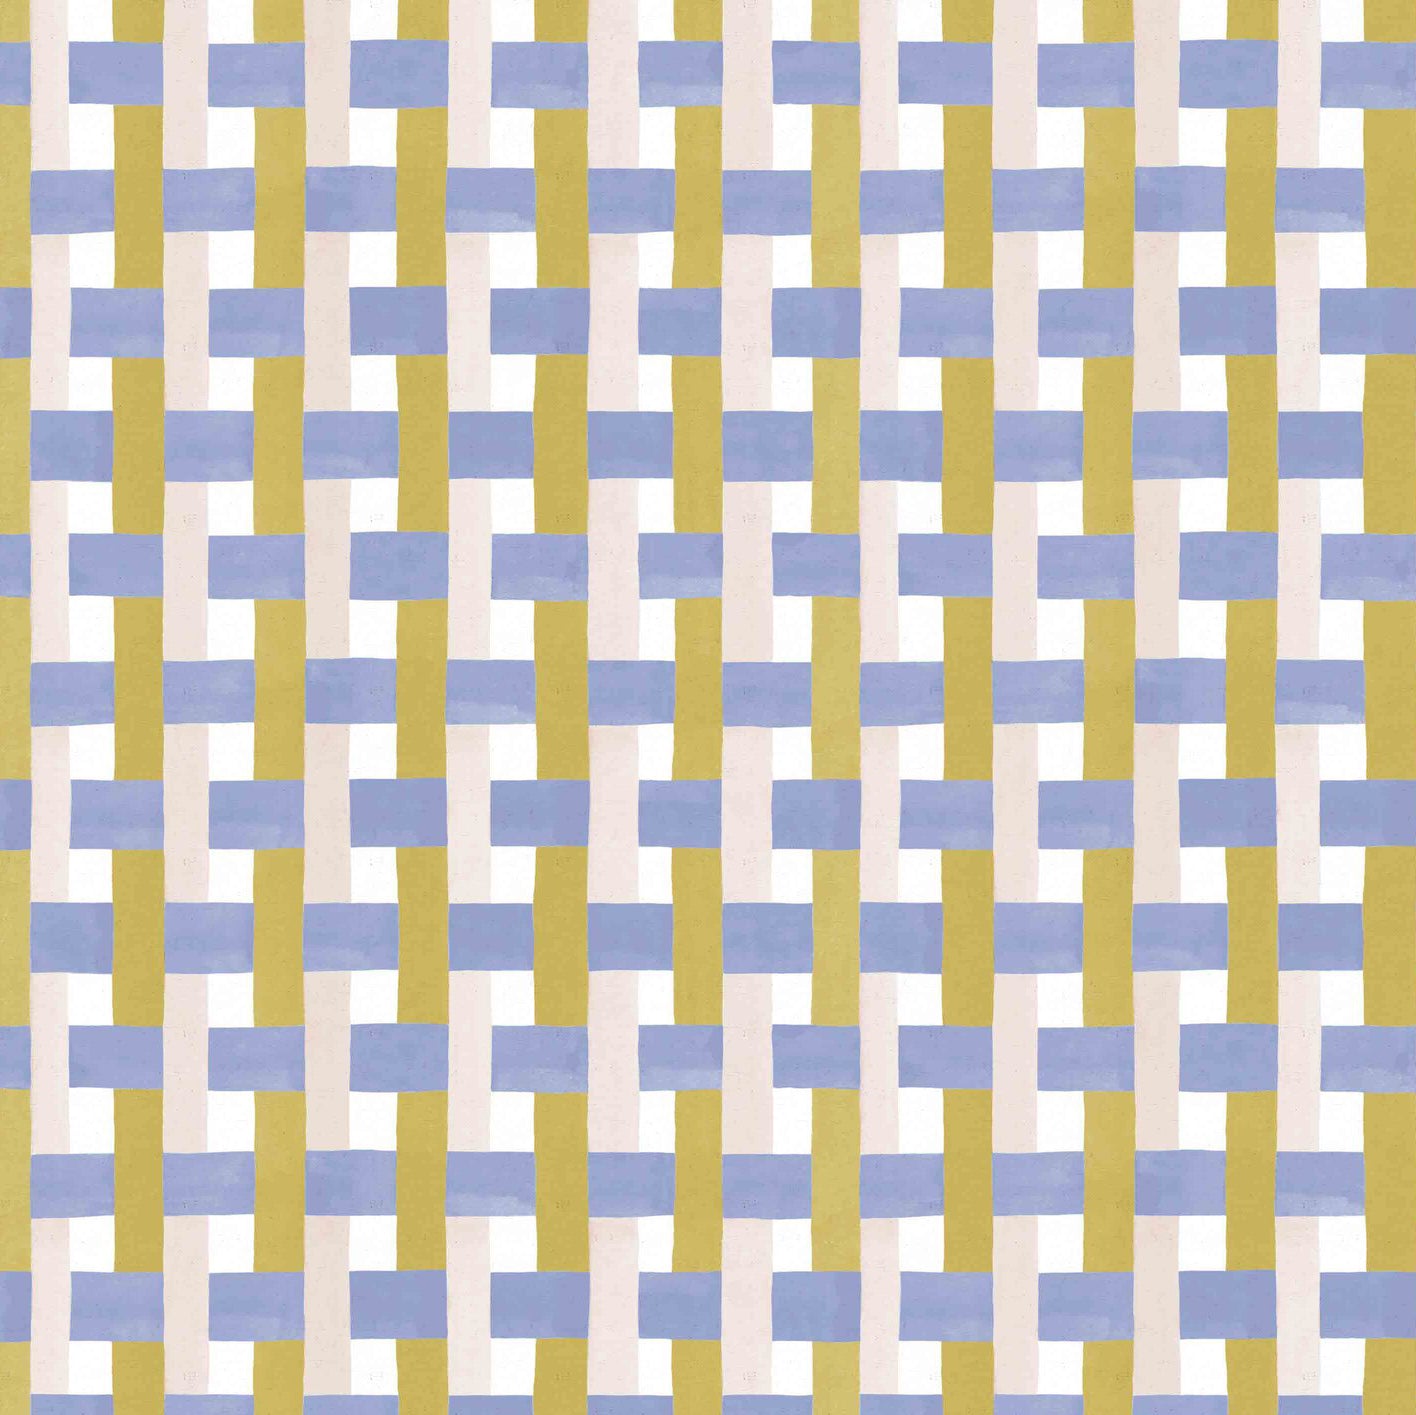 Detail of fabric in an interlocking checked pattern in shades of pink, mustard and blue.